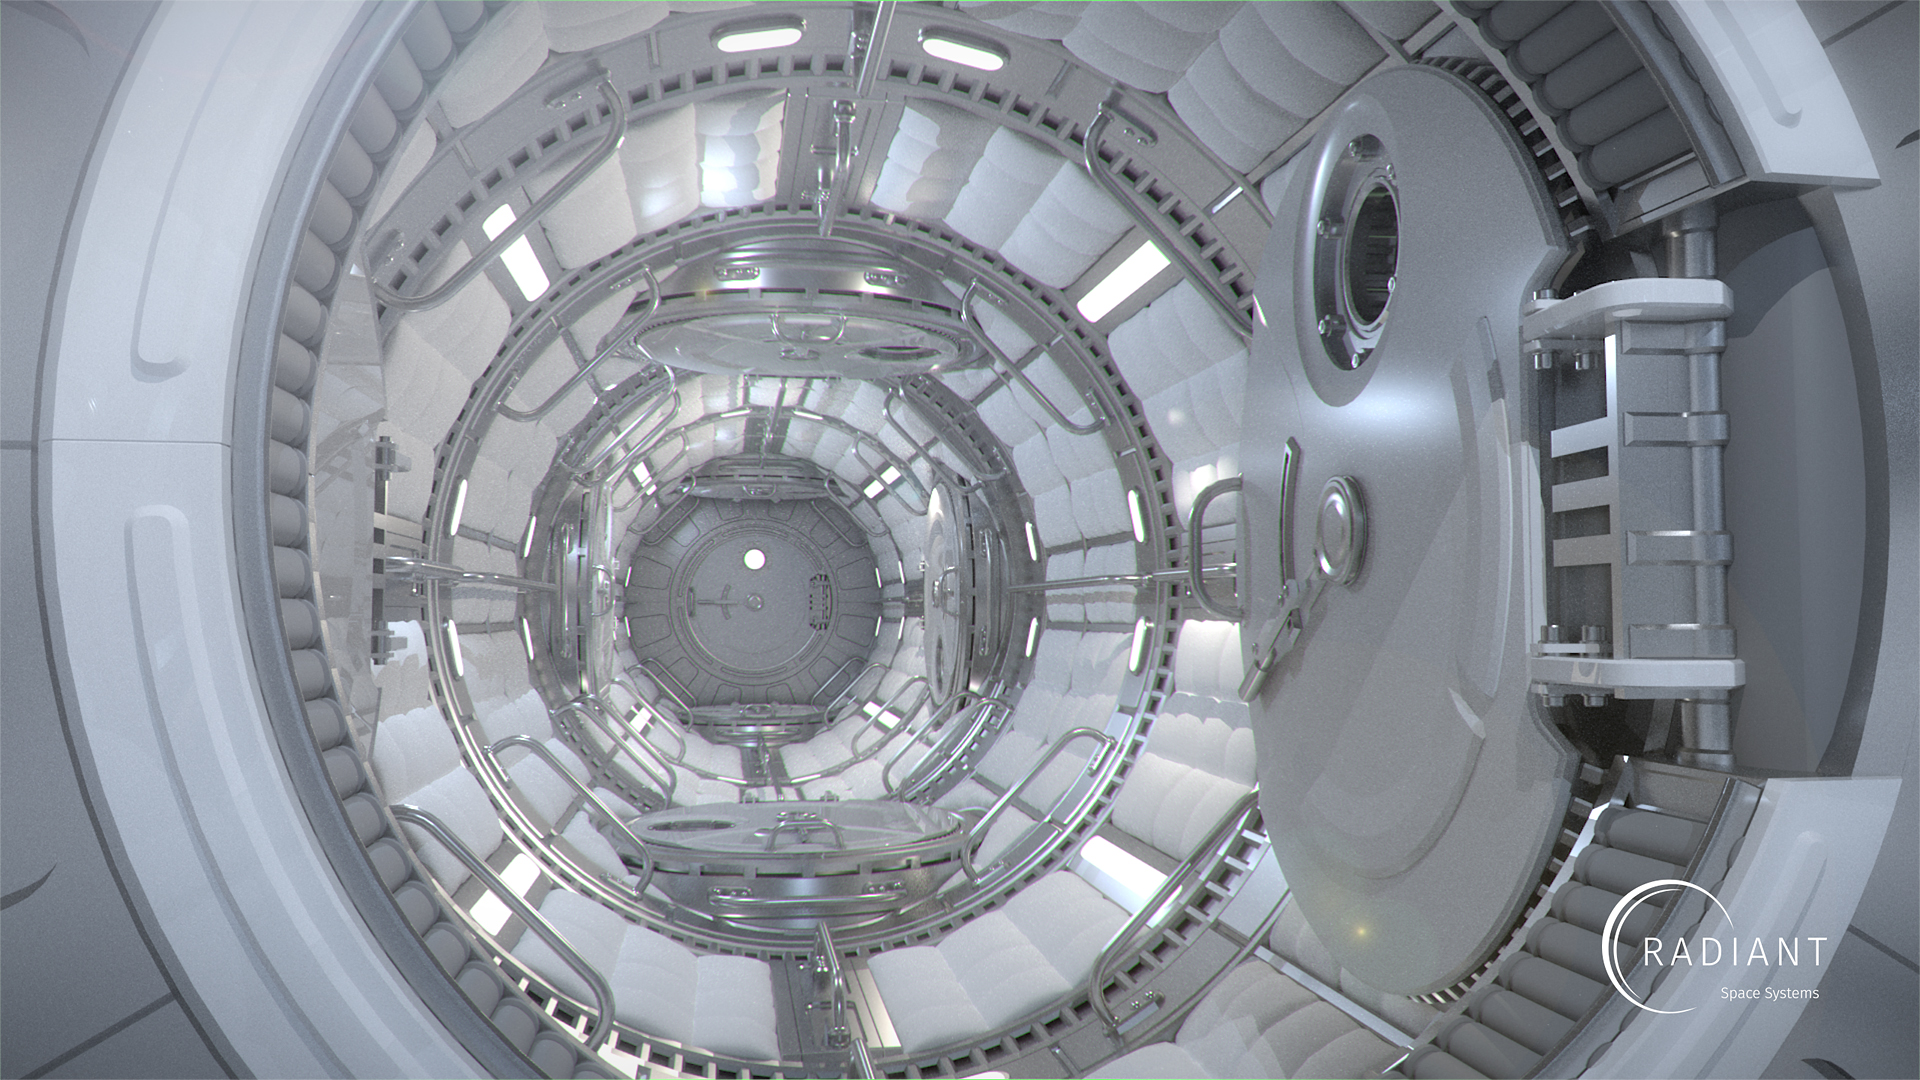 Moving from the cupola to the transit chamber which connects the microgravity area to the rotation matching chamber.